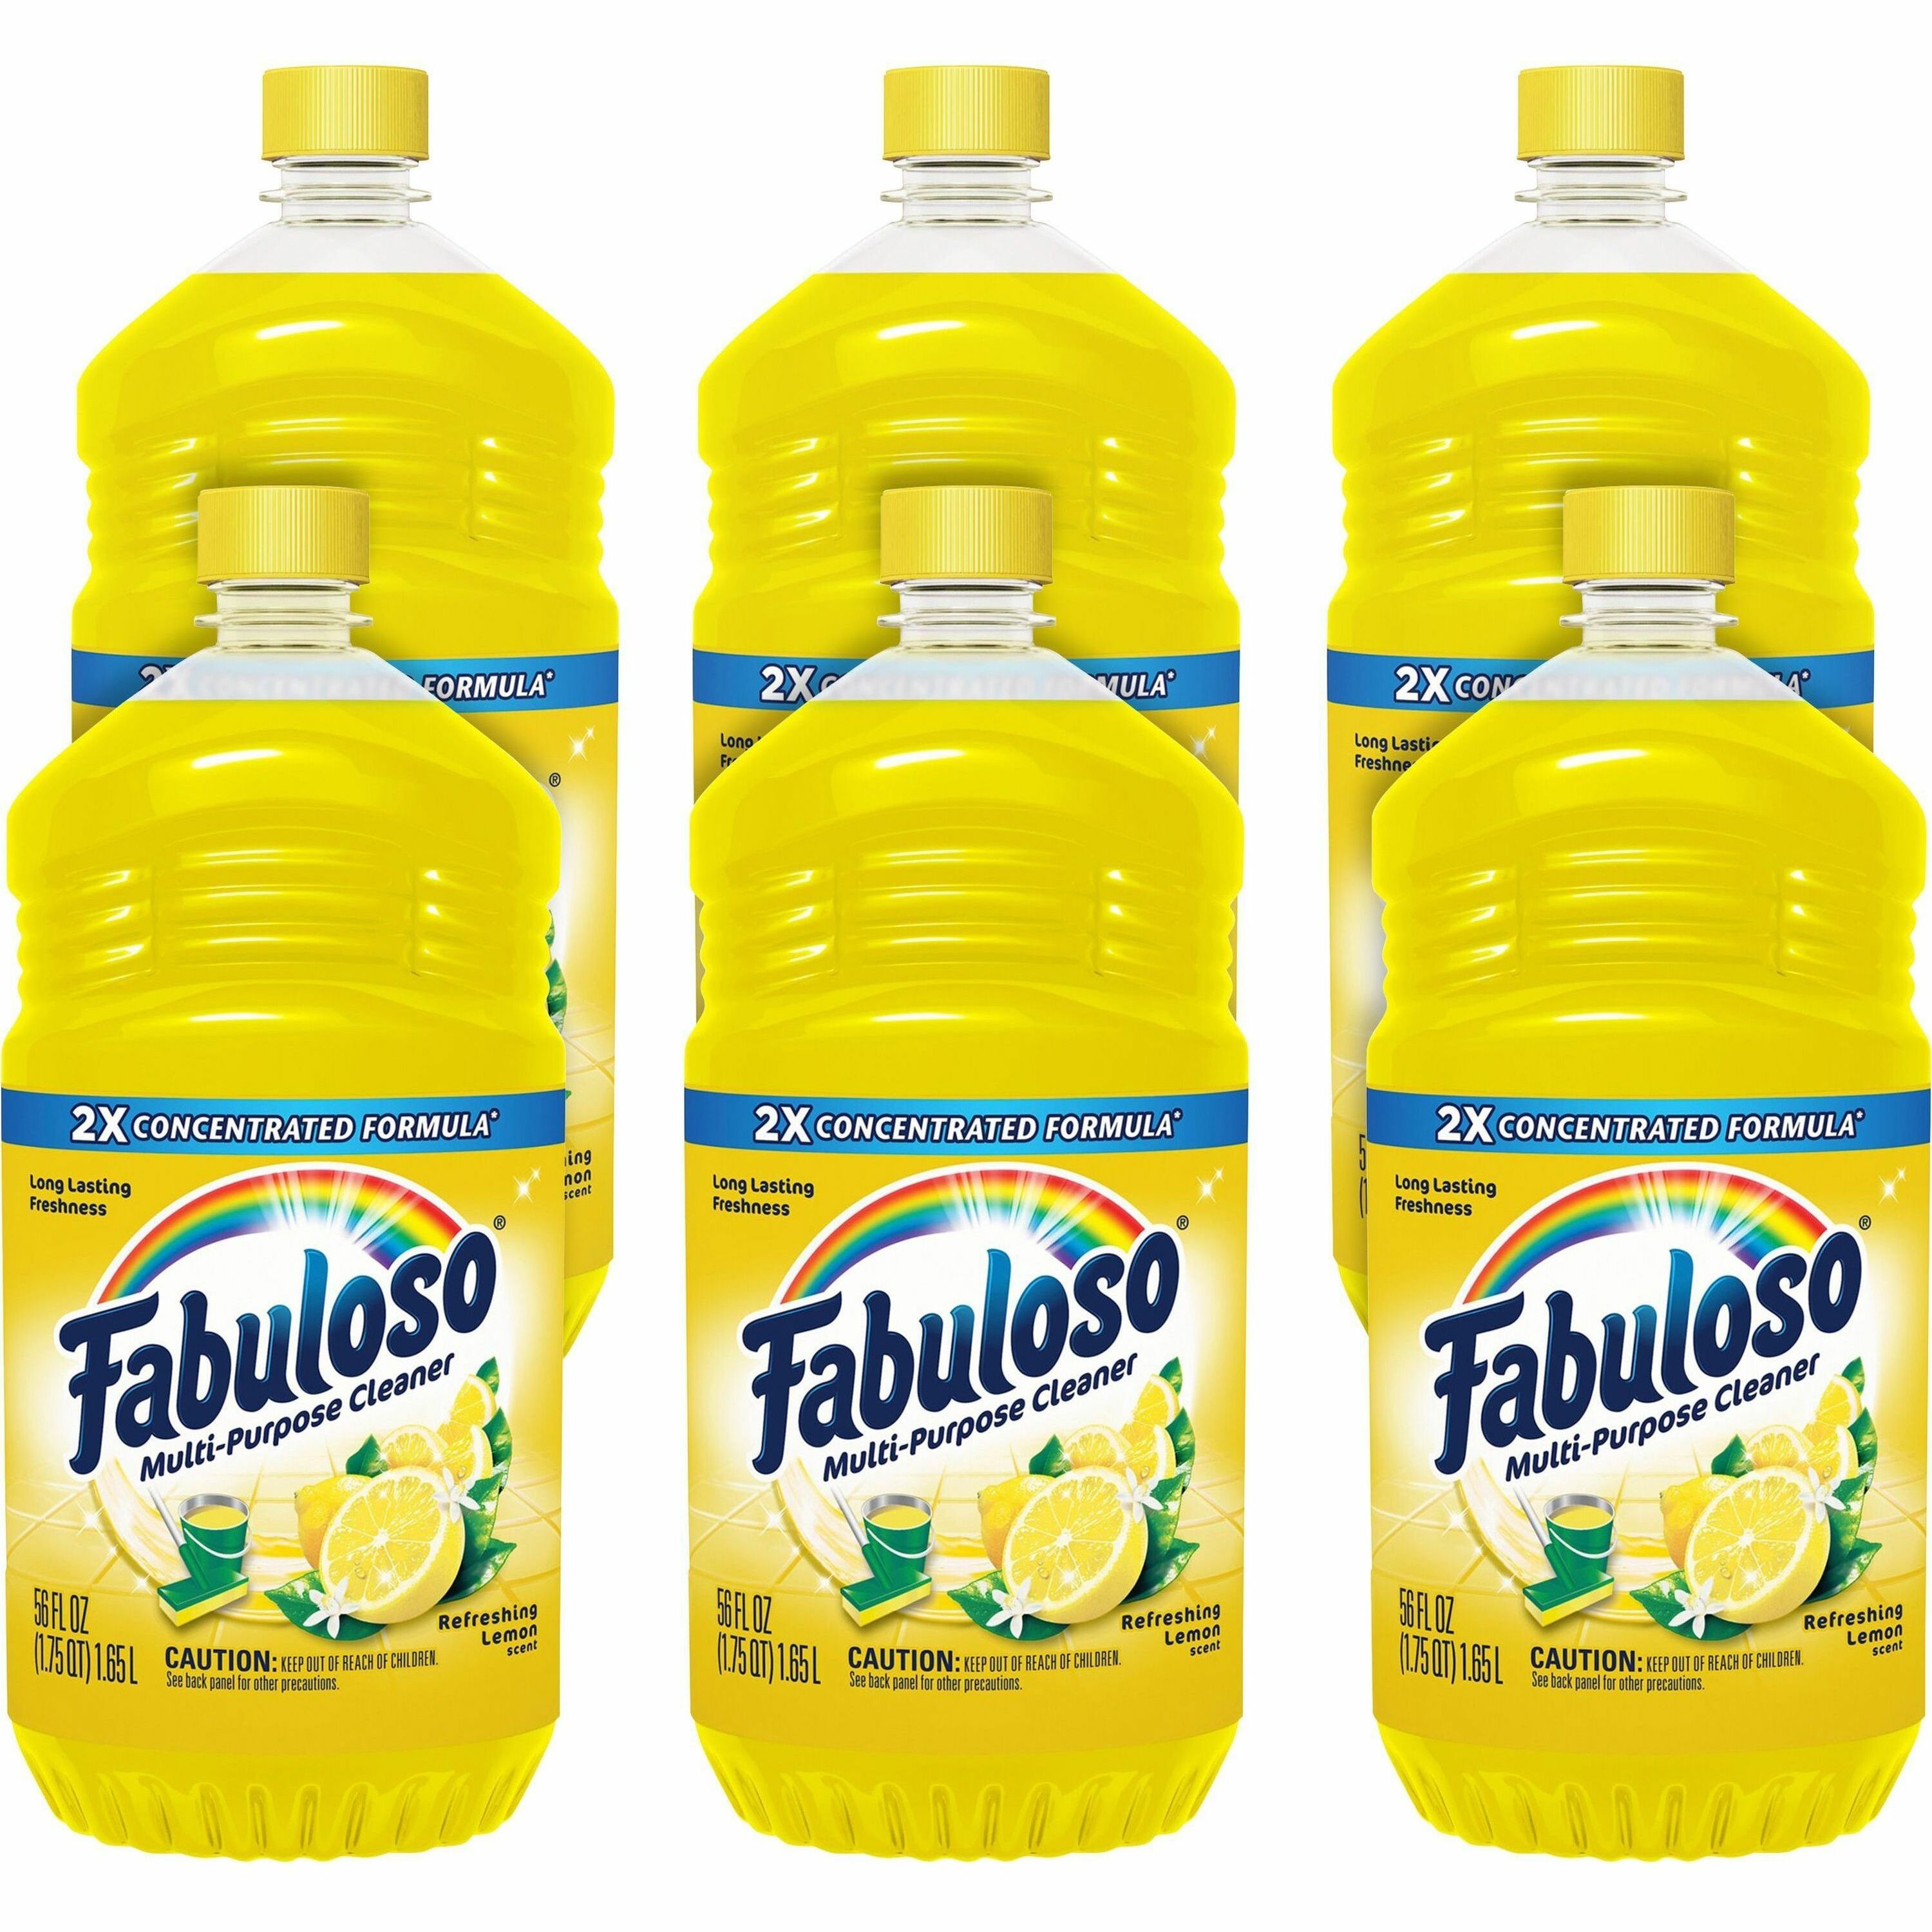 Fabuloso Multi-Purpose Cleaner - For Multipurpose, Multi Surface - Concentrate - 56 fl oz (1.8 quart) - Refreshing Lemon Scent - 6 / Carton - Rinse-free, Residue-free, Long Lasting, Pleasant Scent - Yellow - 1